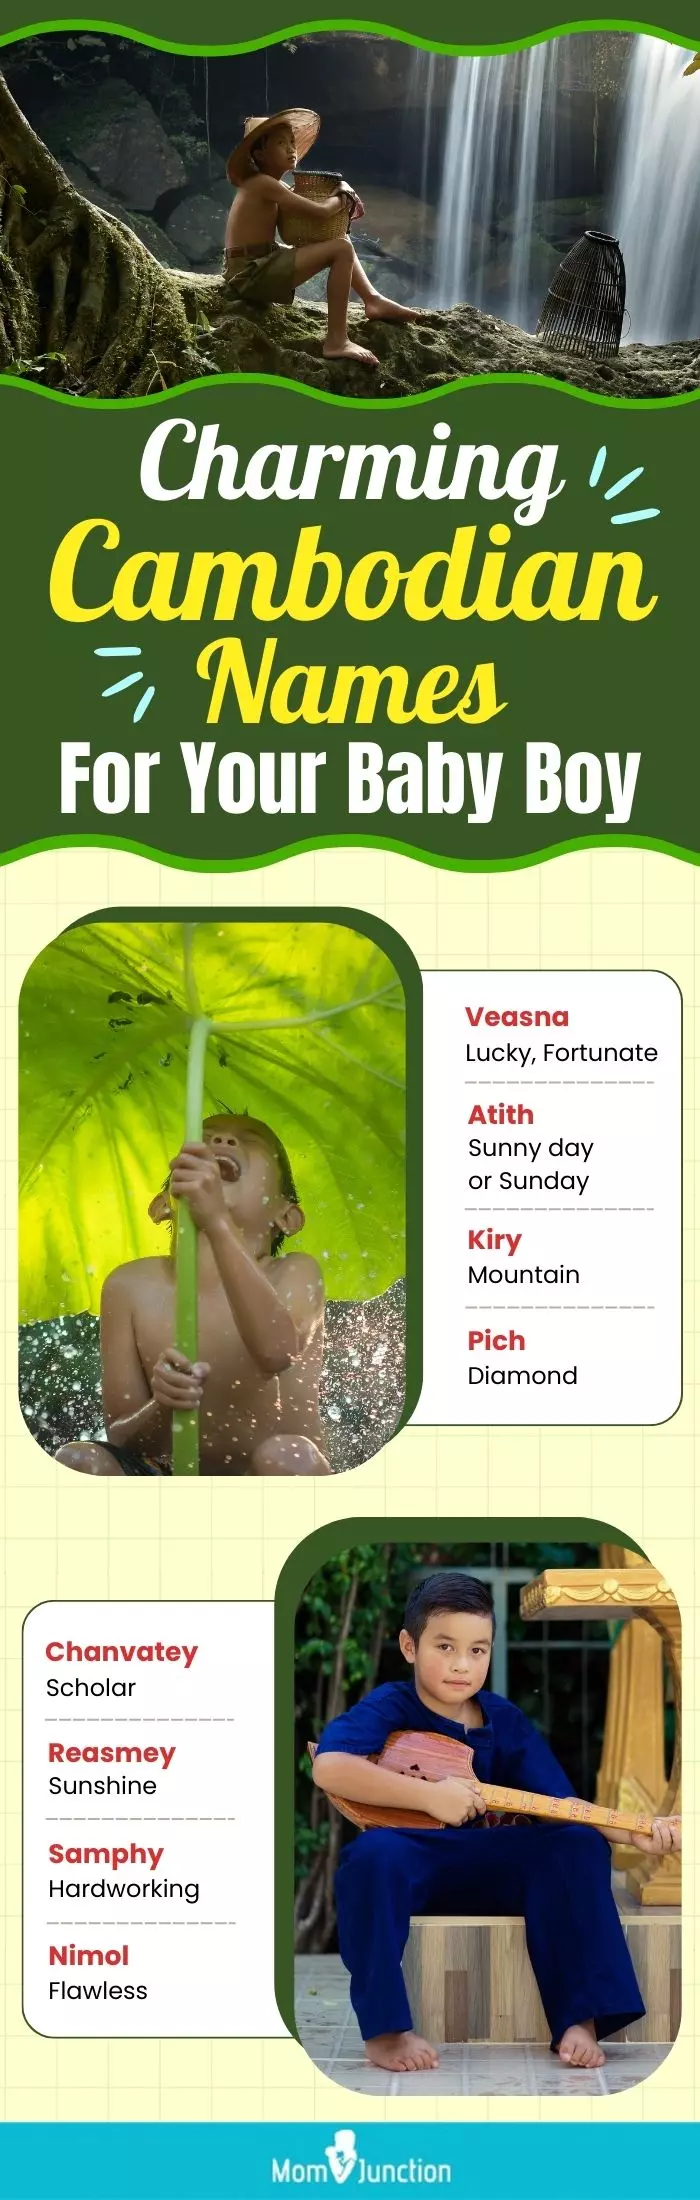 charming cambodian names for your baby boy updated (infographic)